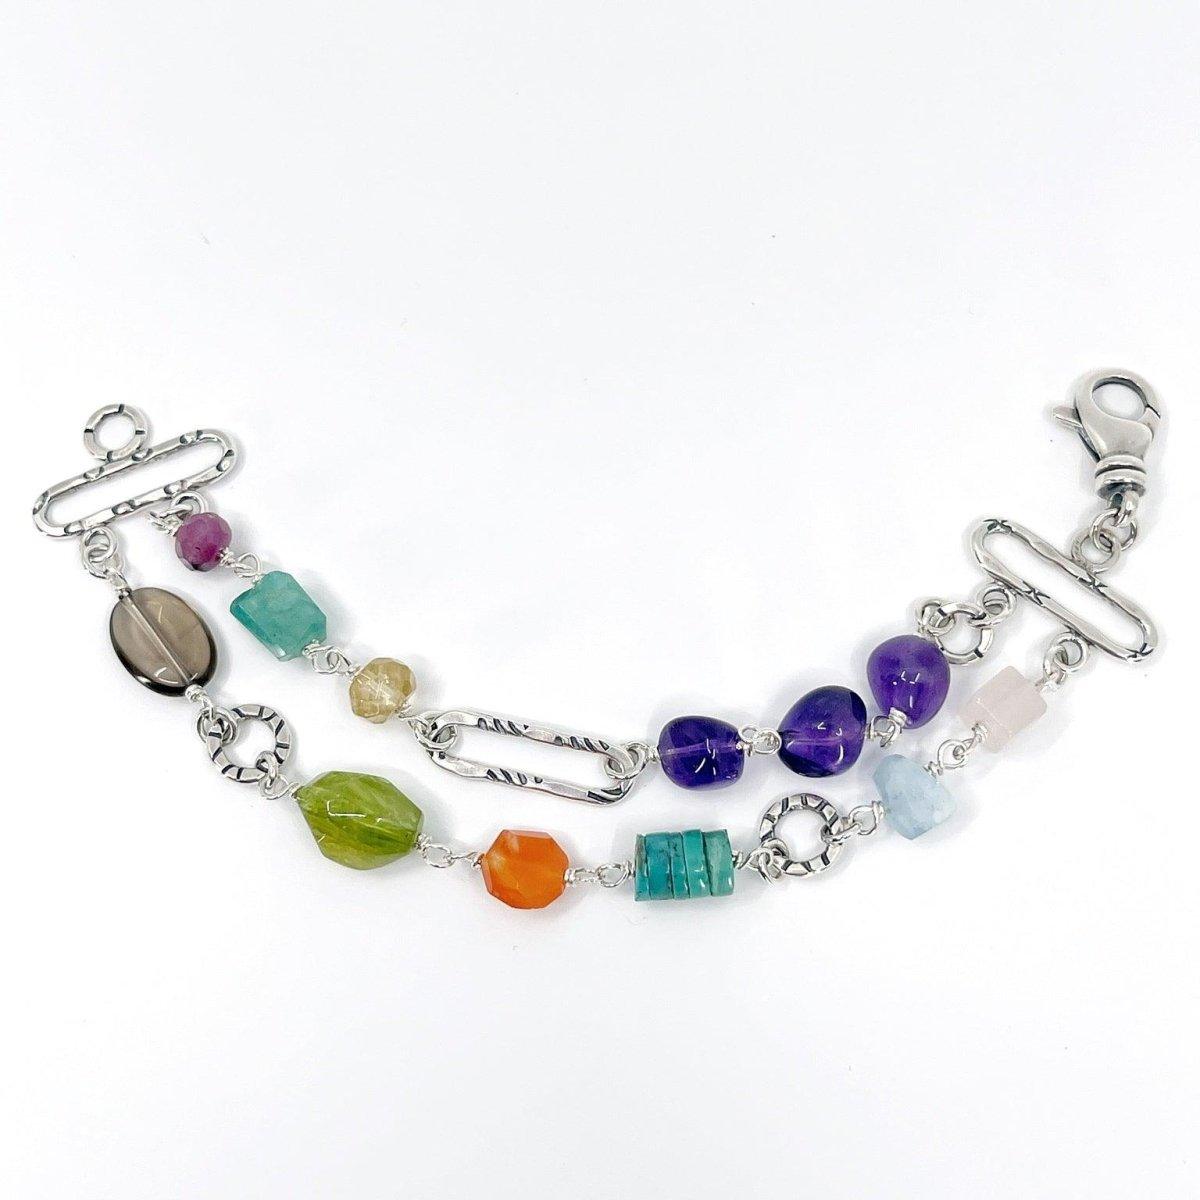 Colorful Bracelet with Sterling Silver and Gemstones - Kristin Christopher